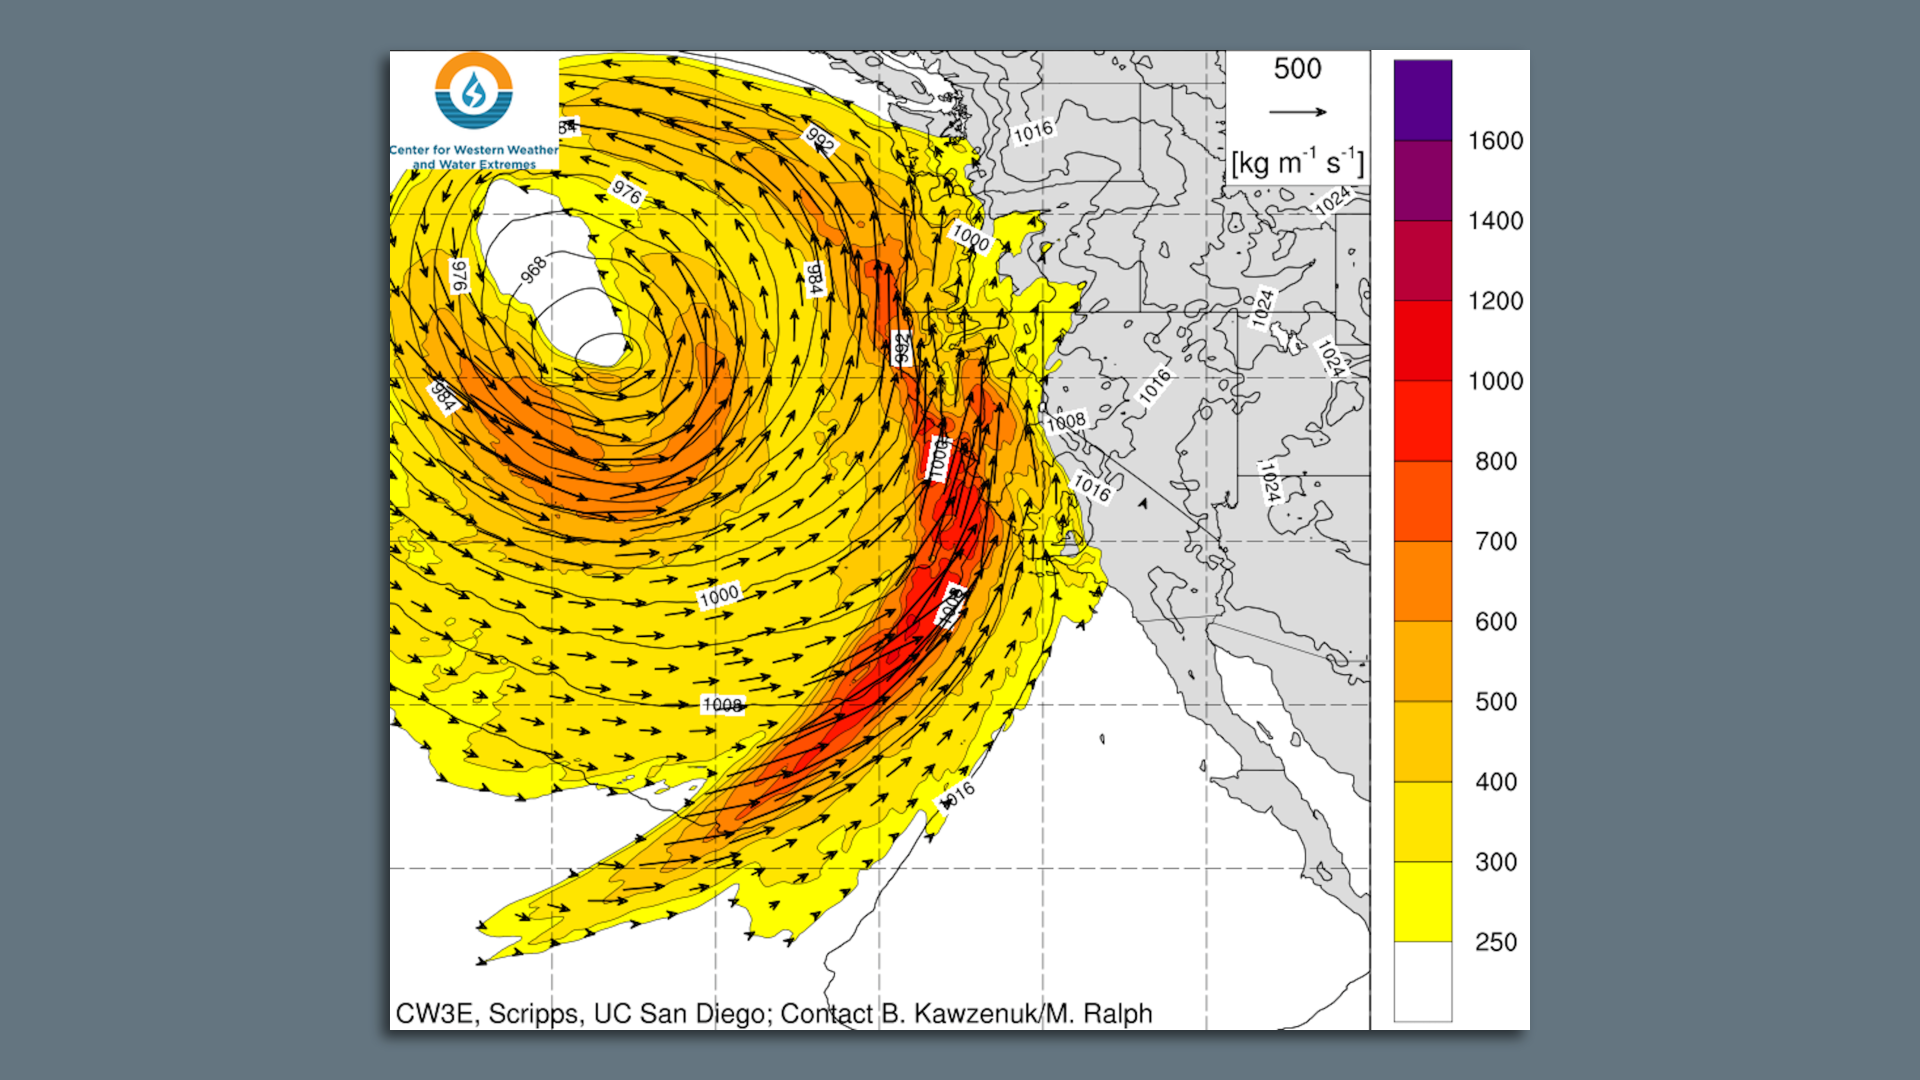 Computer model simulation of a powerful atmospheric river storm expected to hit California.